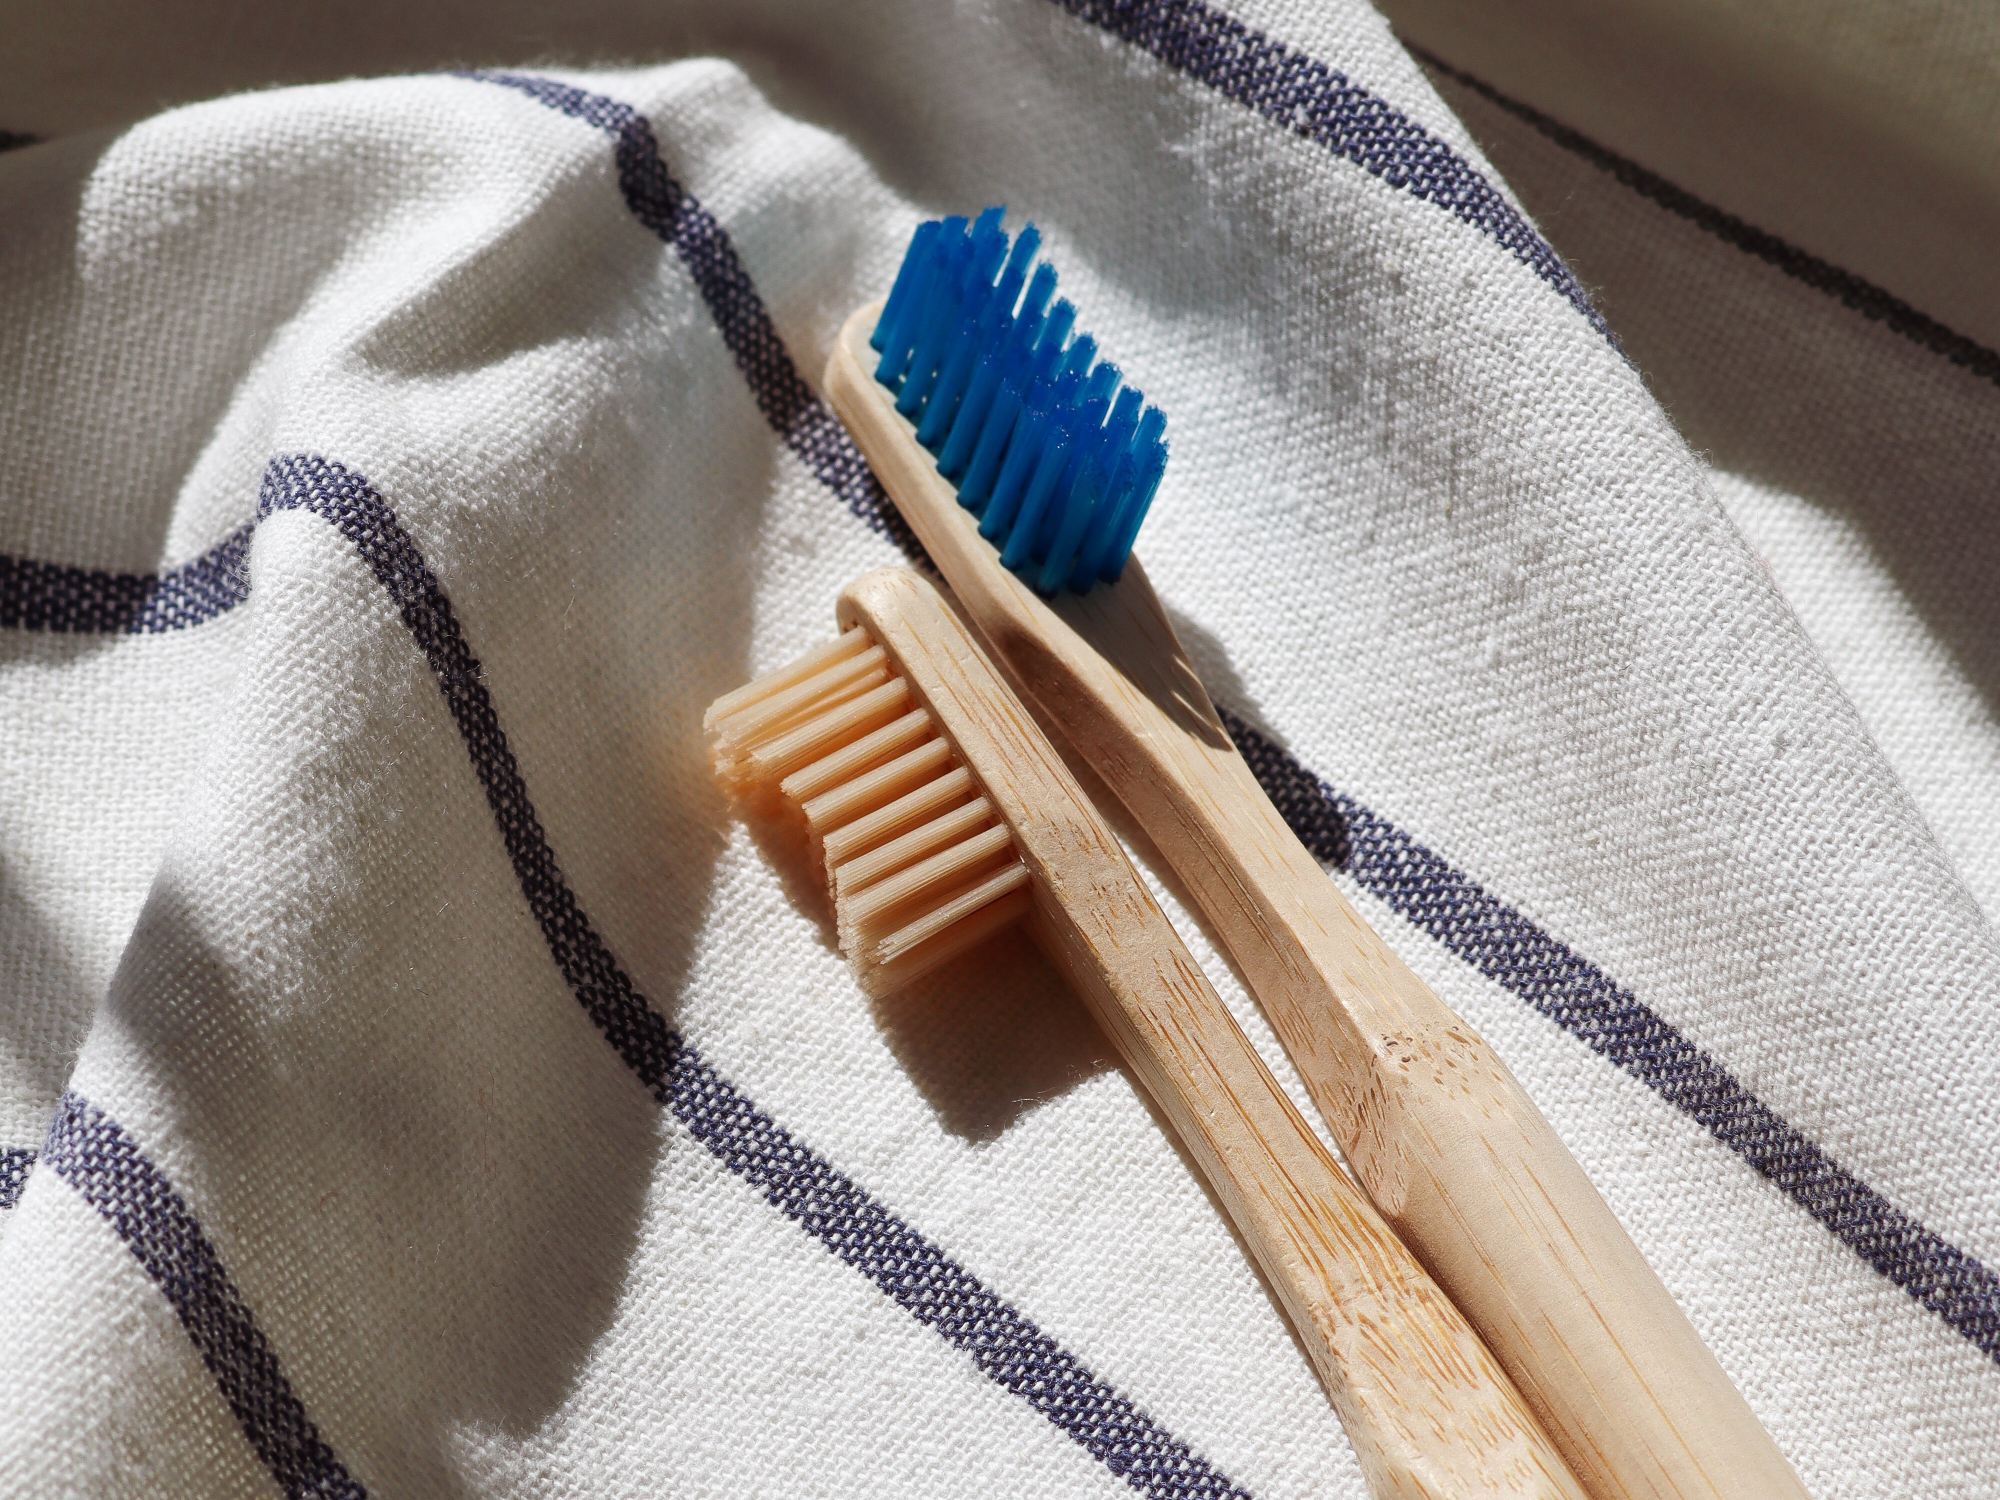 How to safely turn your old toothbrush into a household cleaning tool